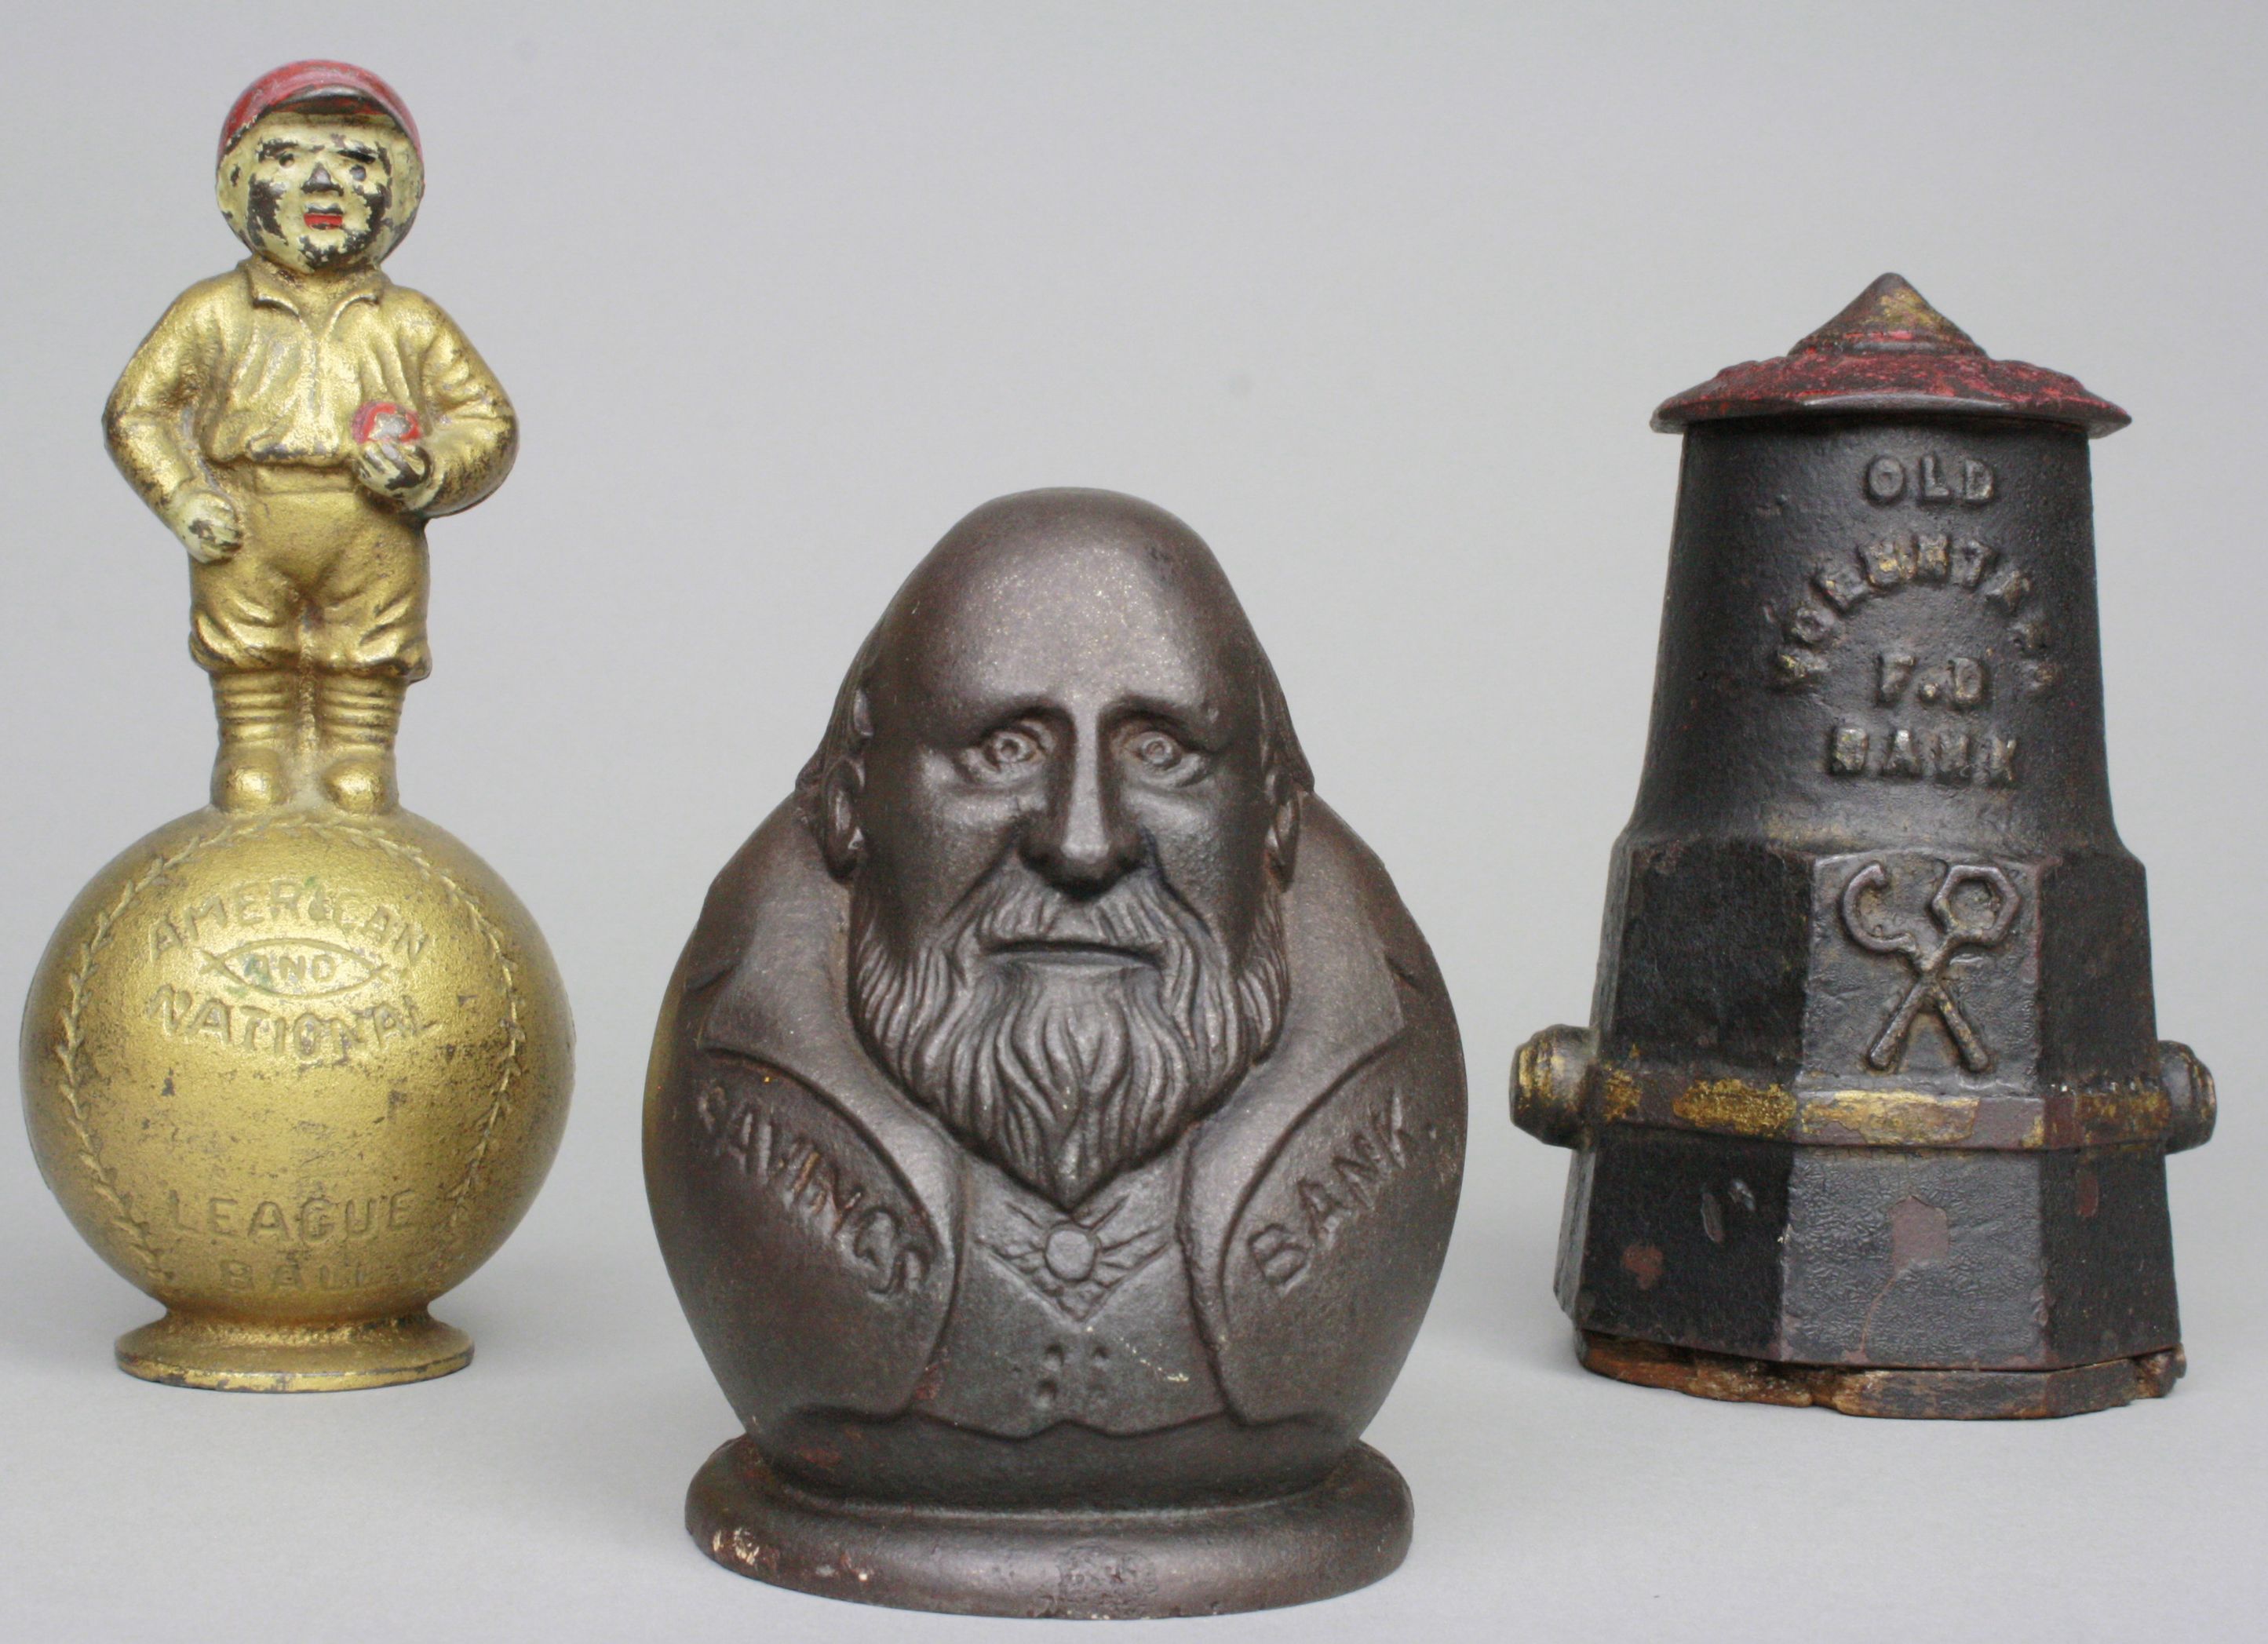 Seldom-seen still banks including (left to right) Mascot, Tammany Tiger, and Old Volunteer F.D. Fire Plug. RSL Auction image